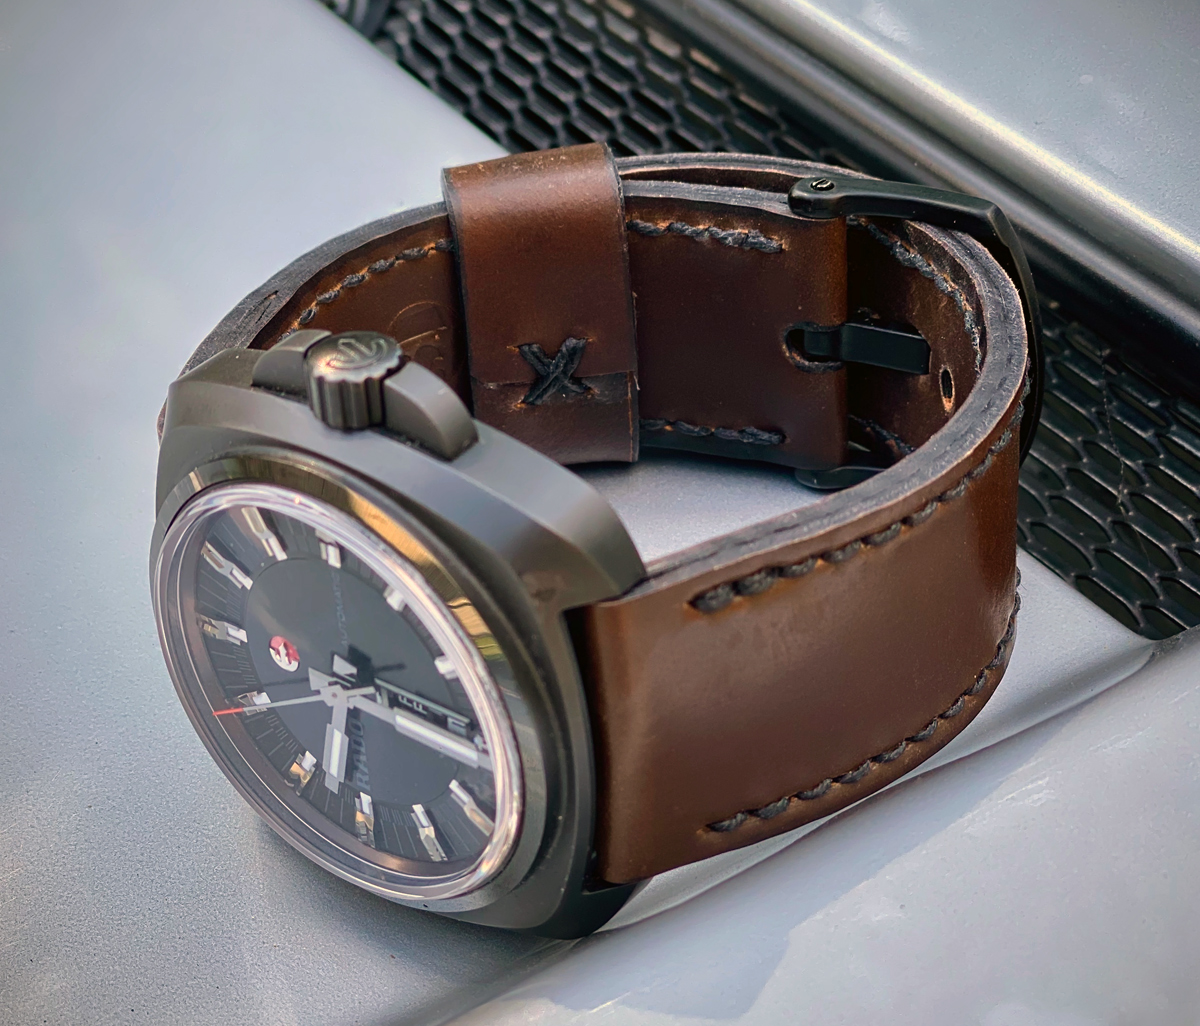 Rado HyperChrome 1616 on Brown shell cordovan leather with black stitching. © Michael Moser